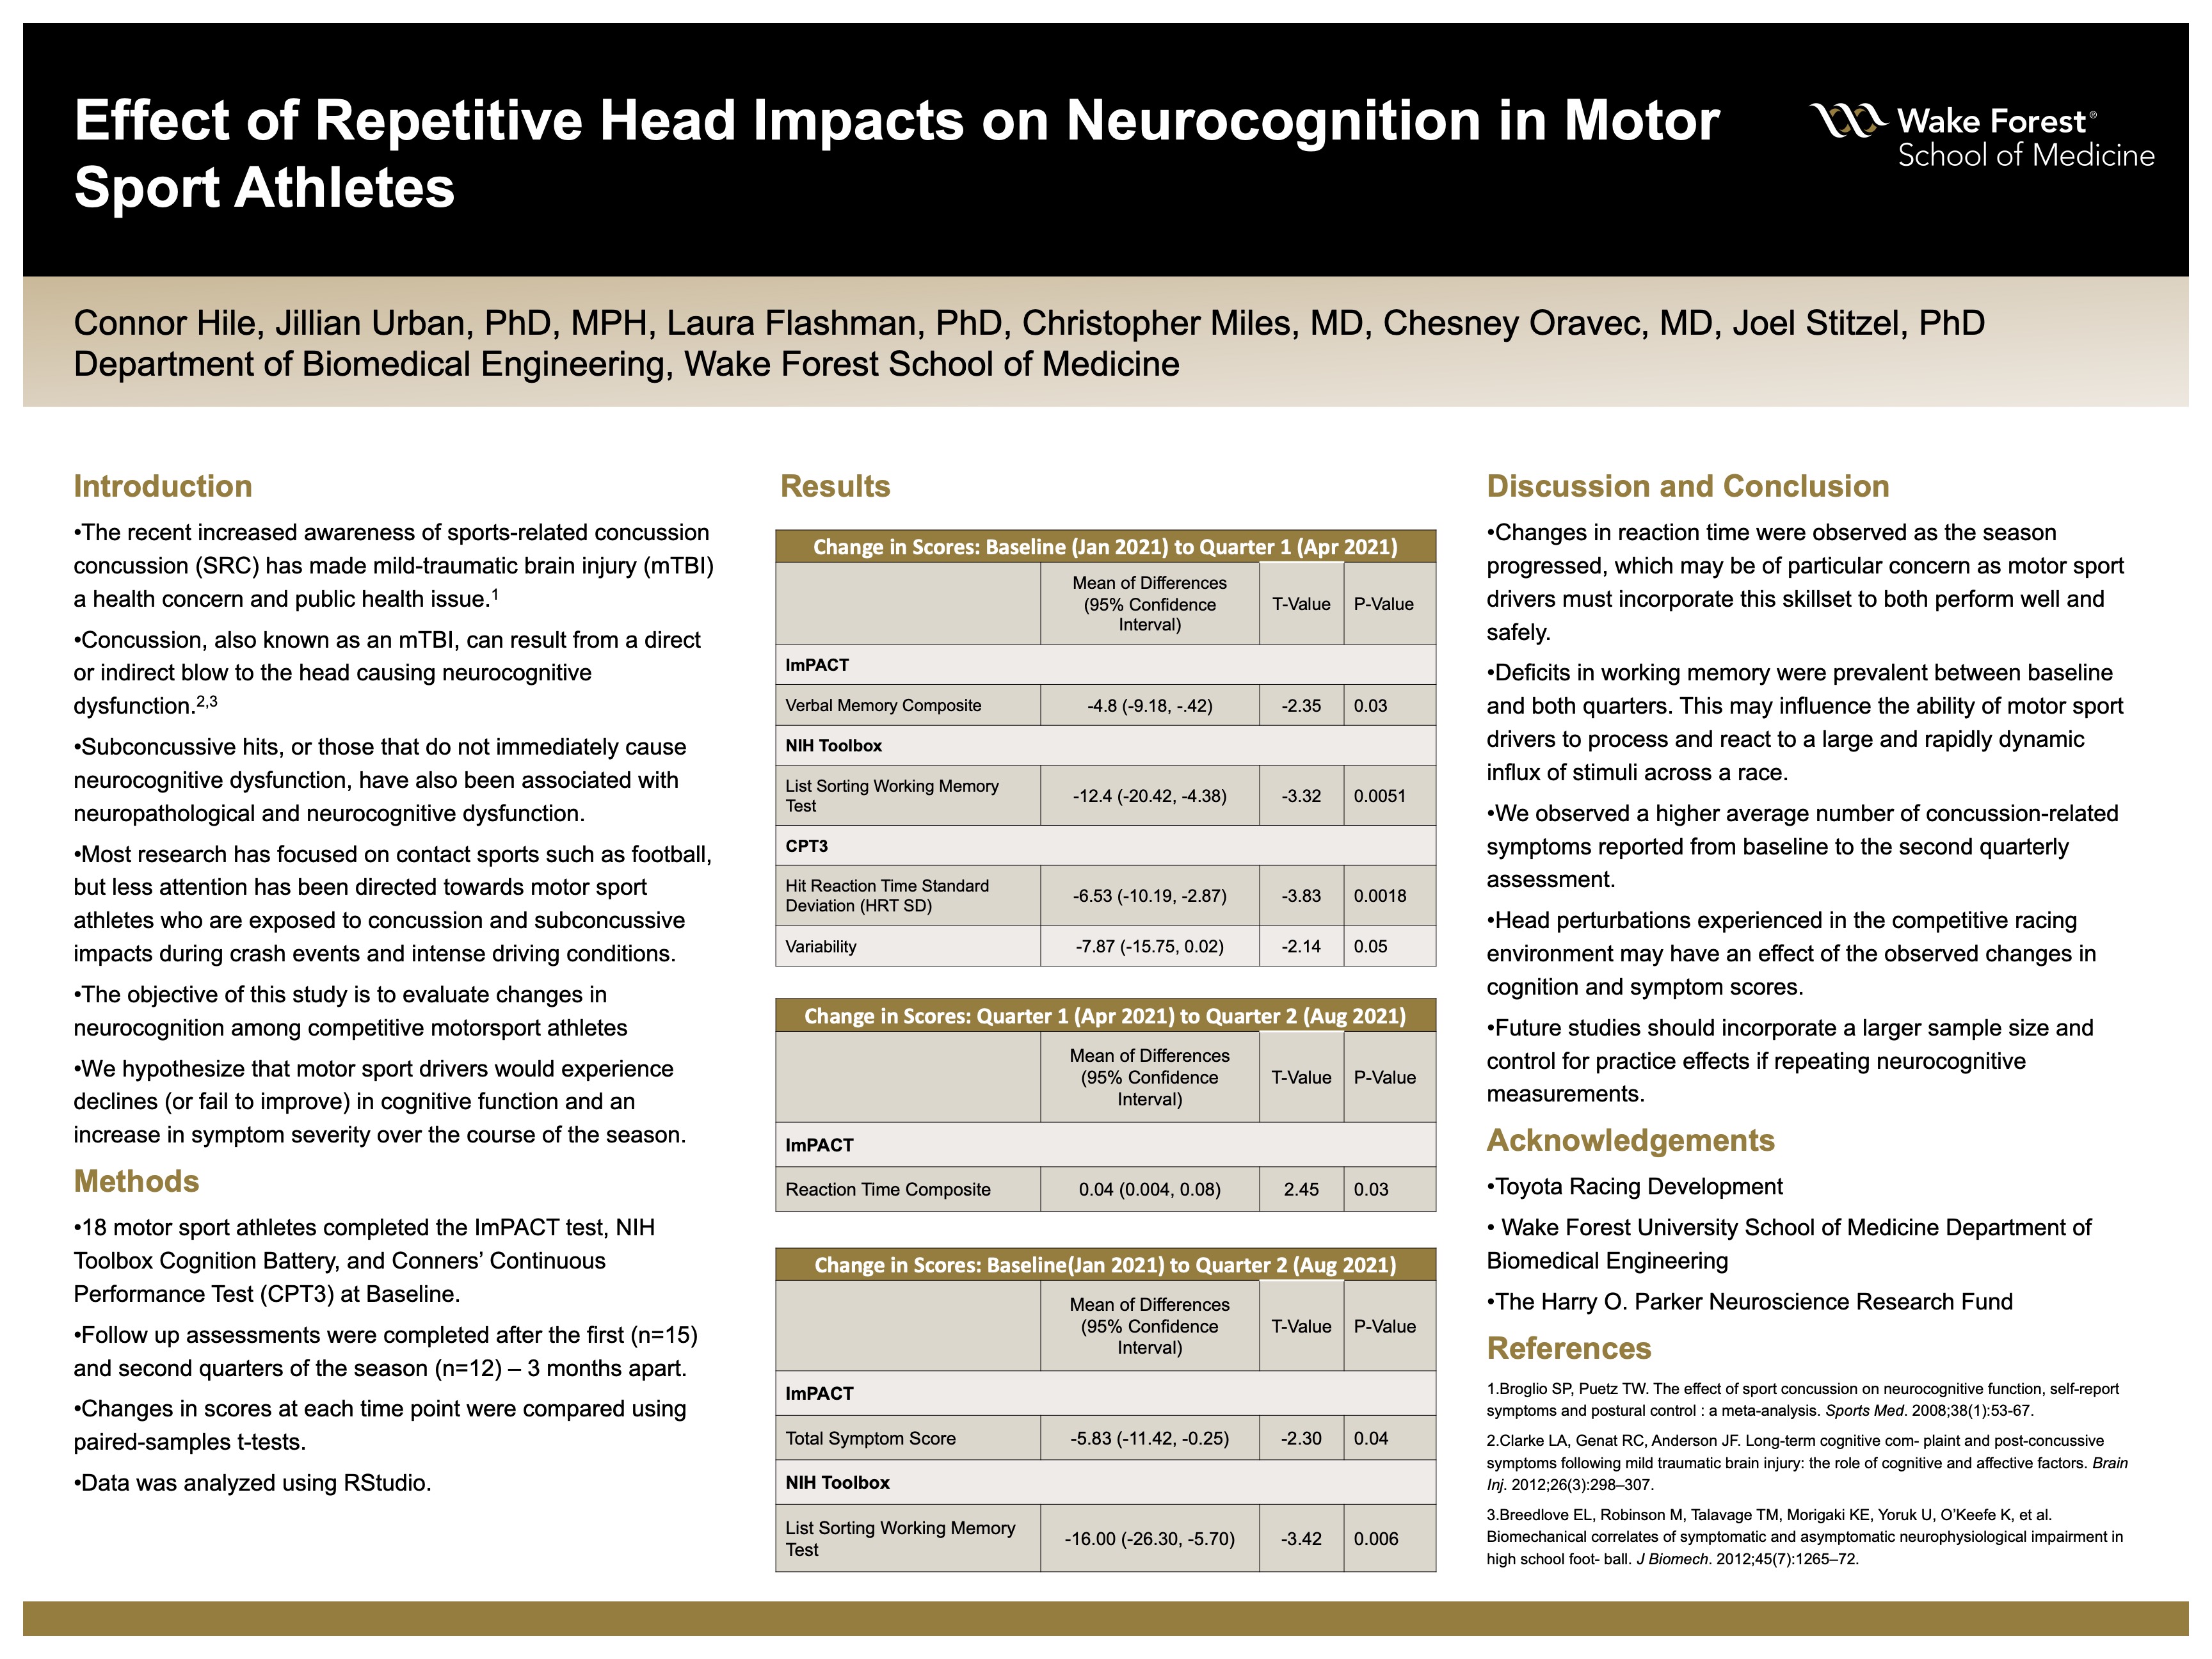 Showcase Image for Effect of Repetitive Head Impacts on Neurocognition in Motor Sport Athletes